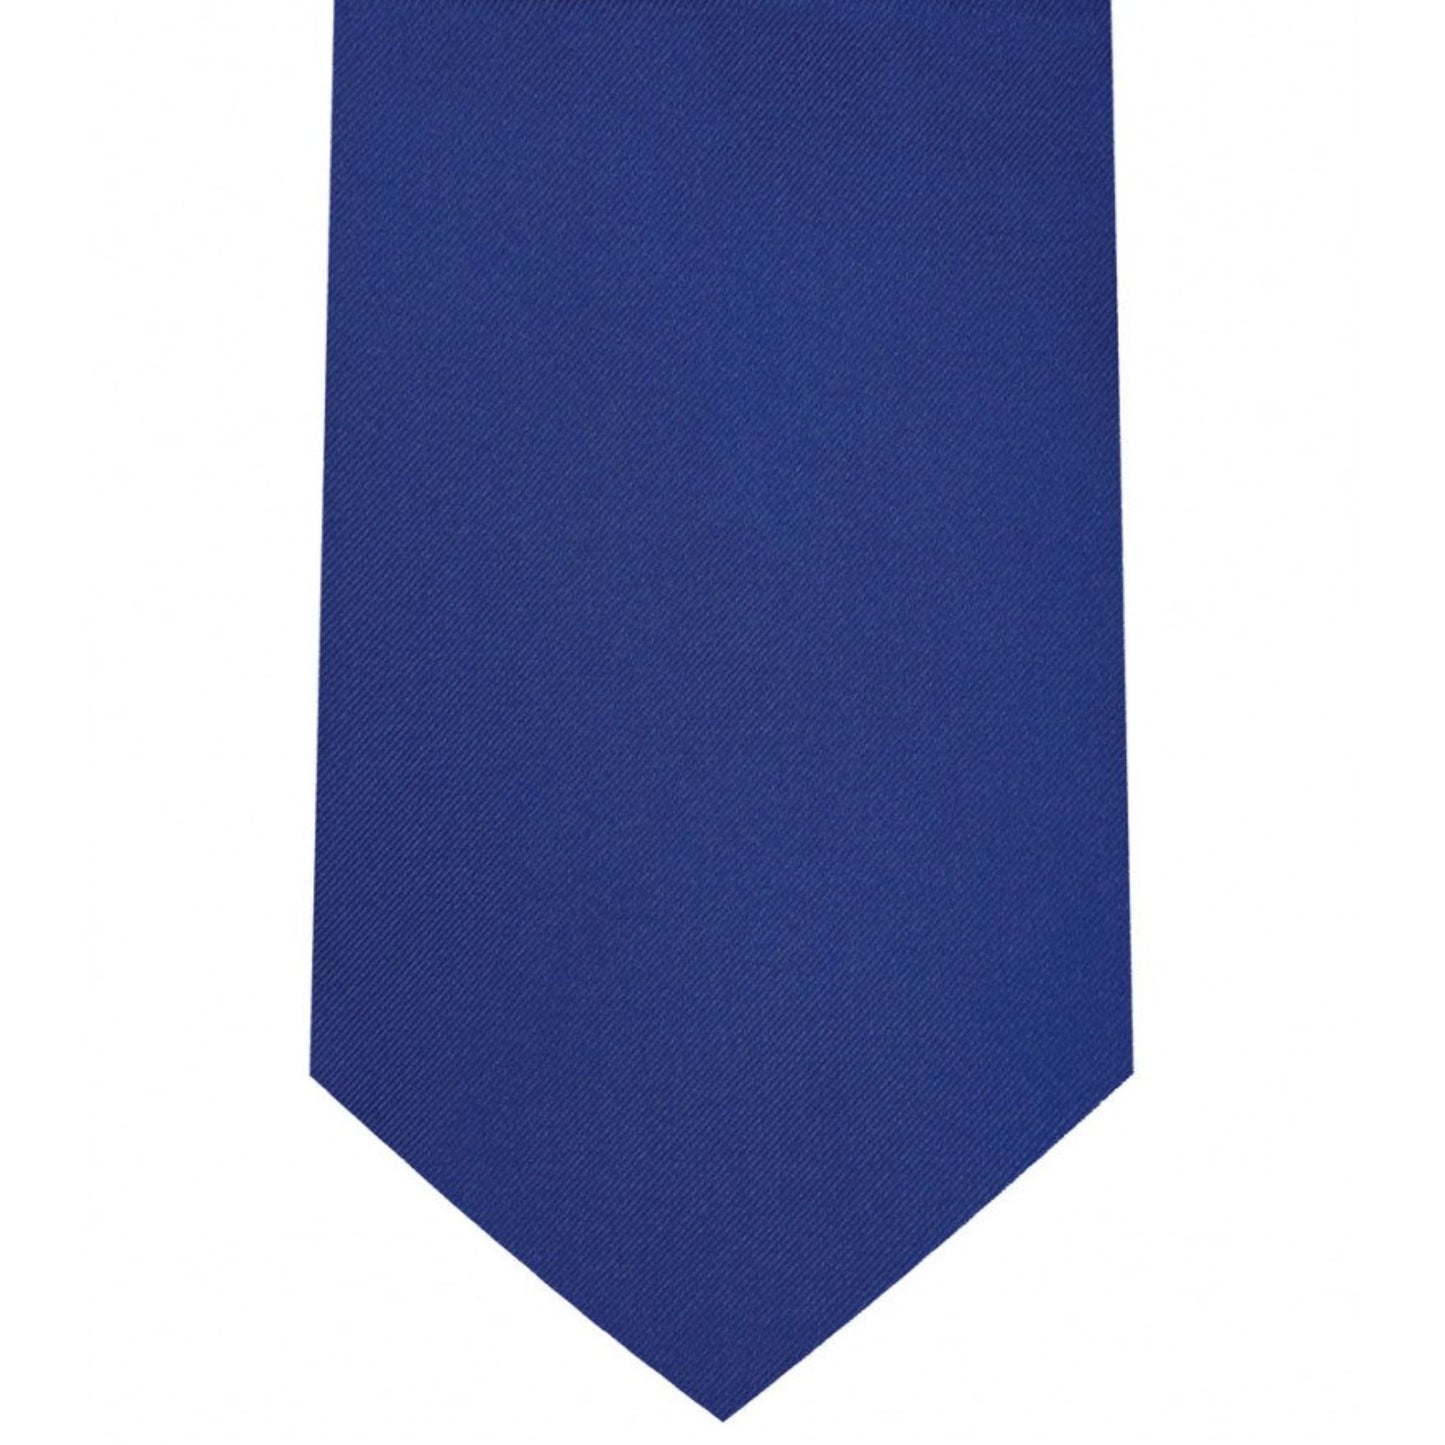 Classic Cobalt Cobalt Tie Regular width 3.5 inches With Matching Pocket Square | KCT Menswear